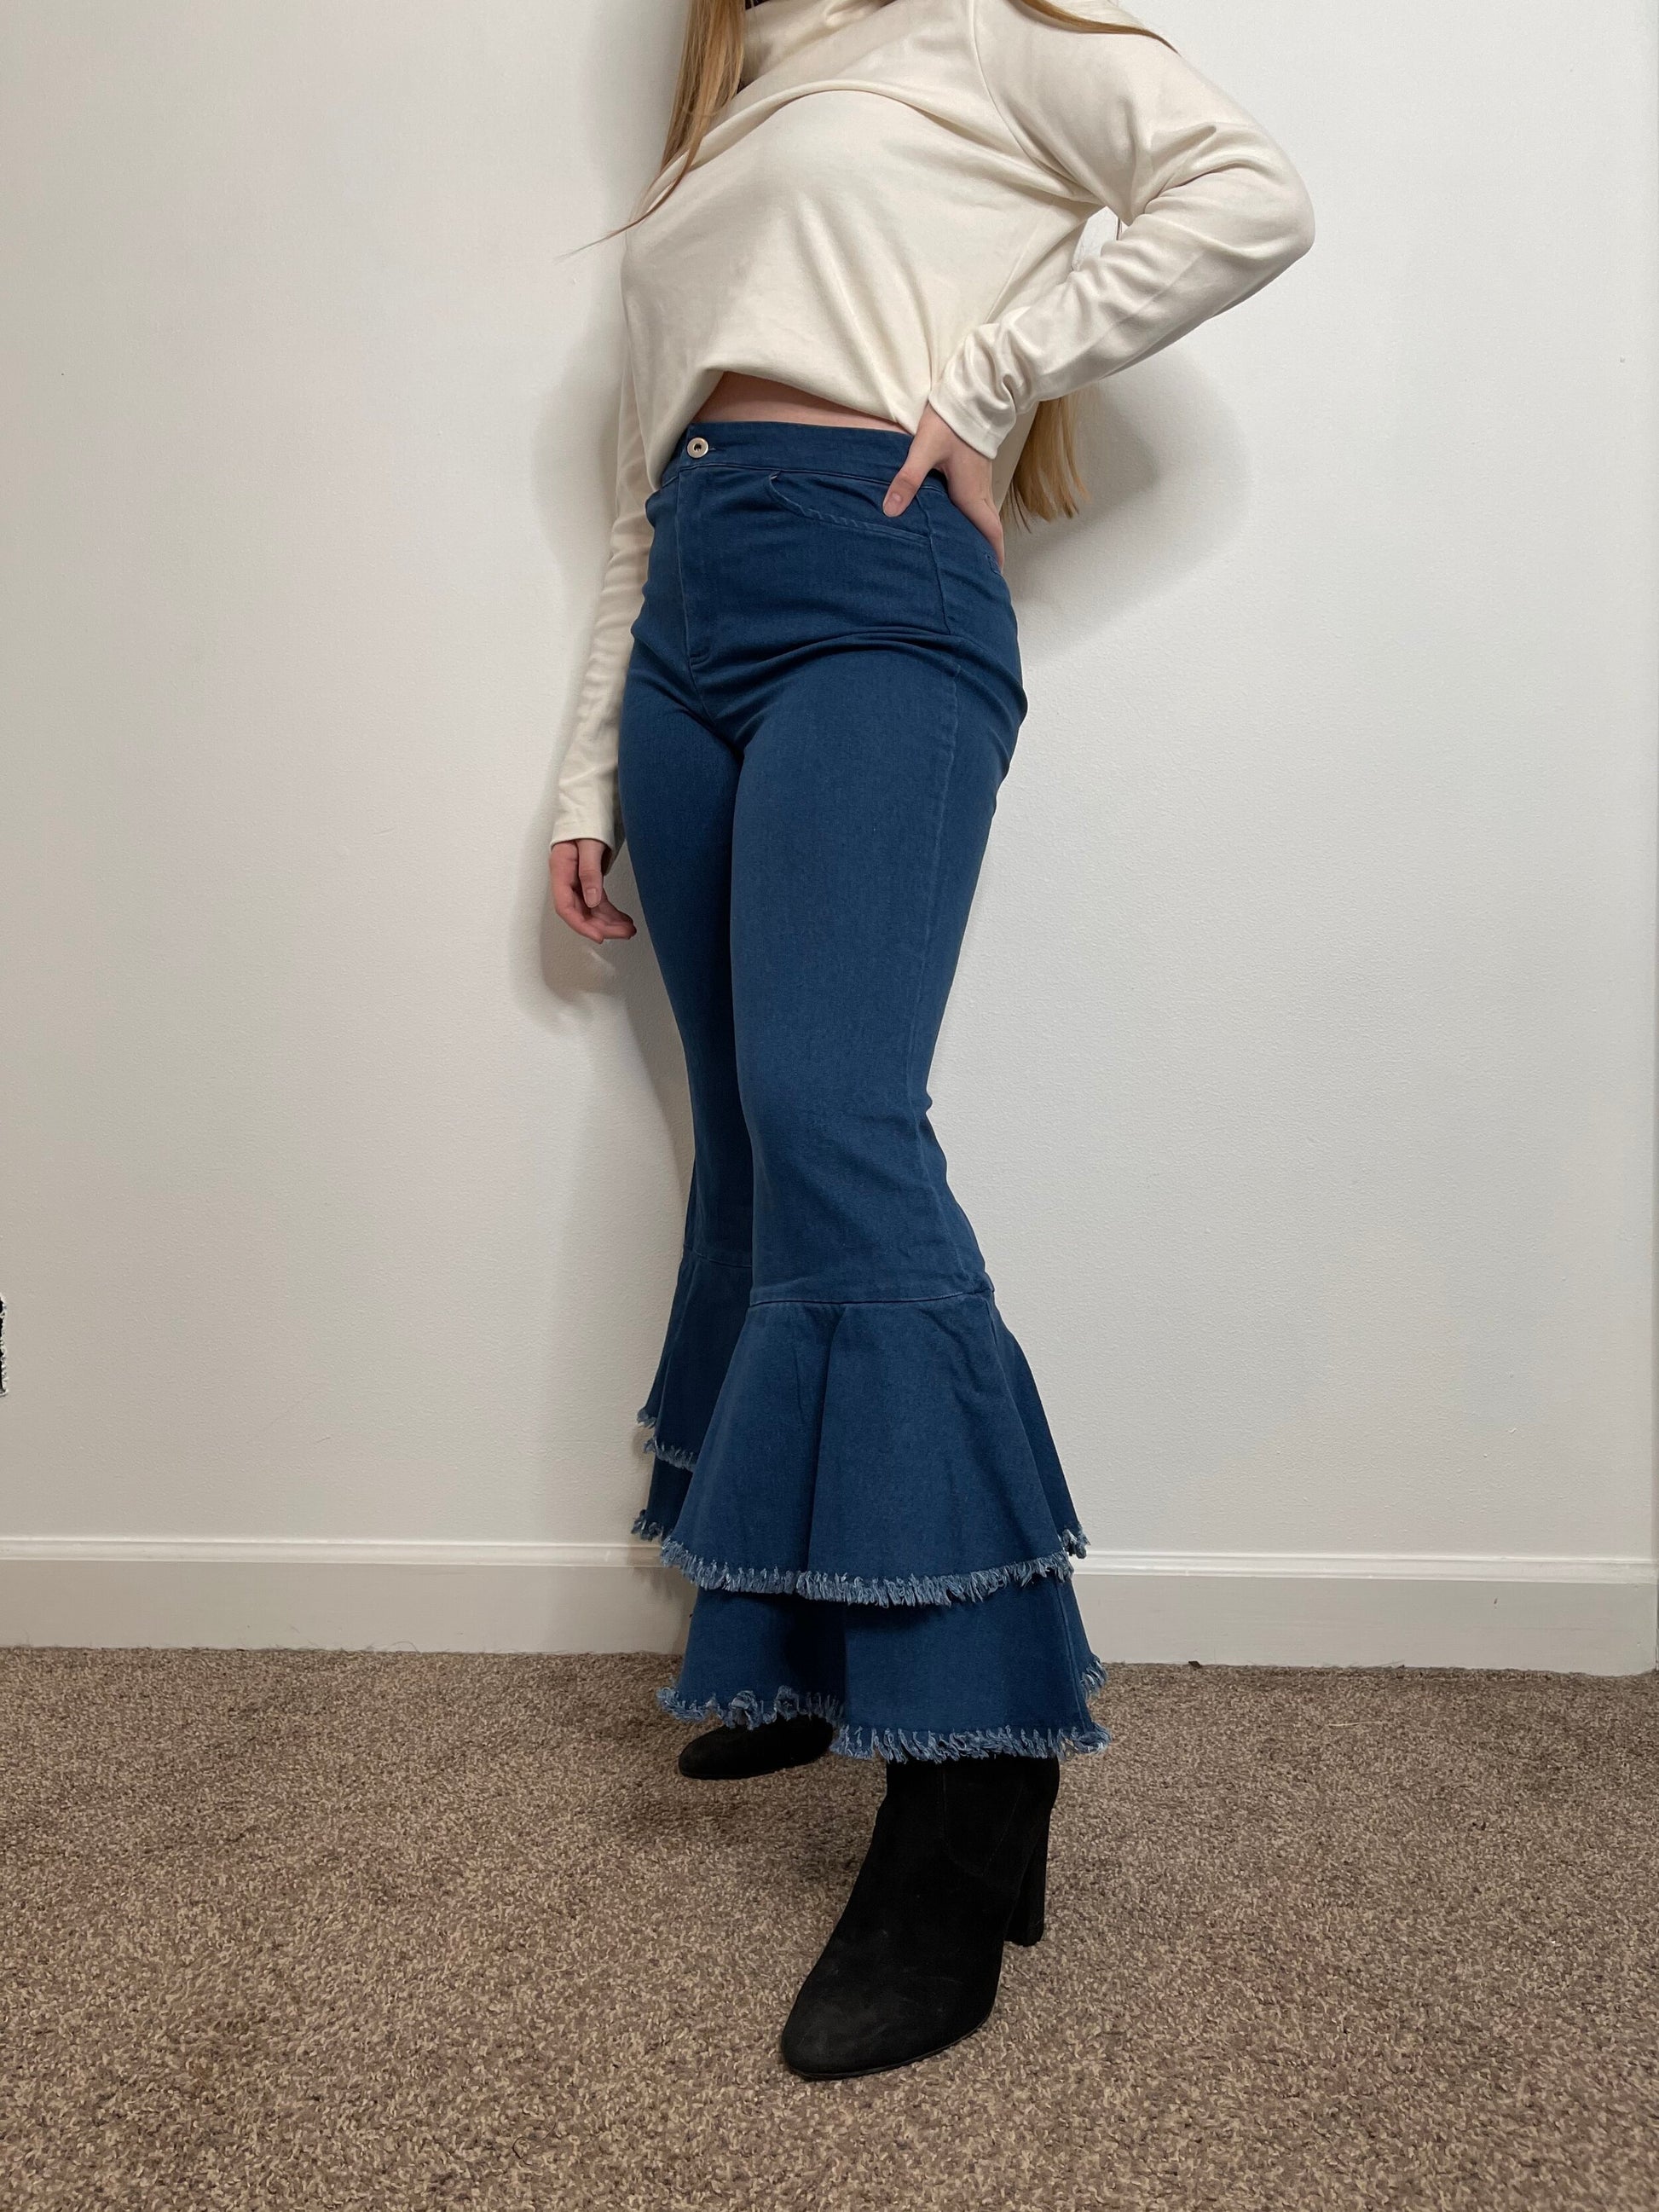 Layers Ruffle Jeans Always Sunny Boutique